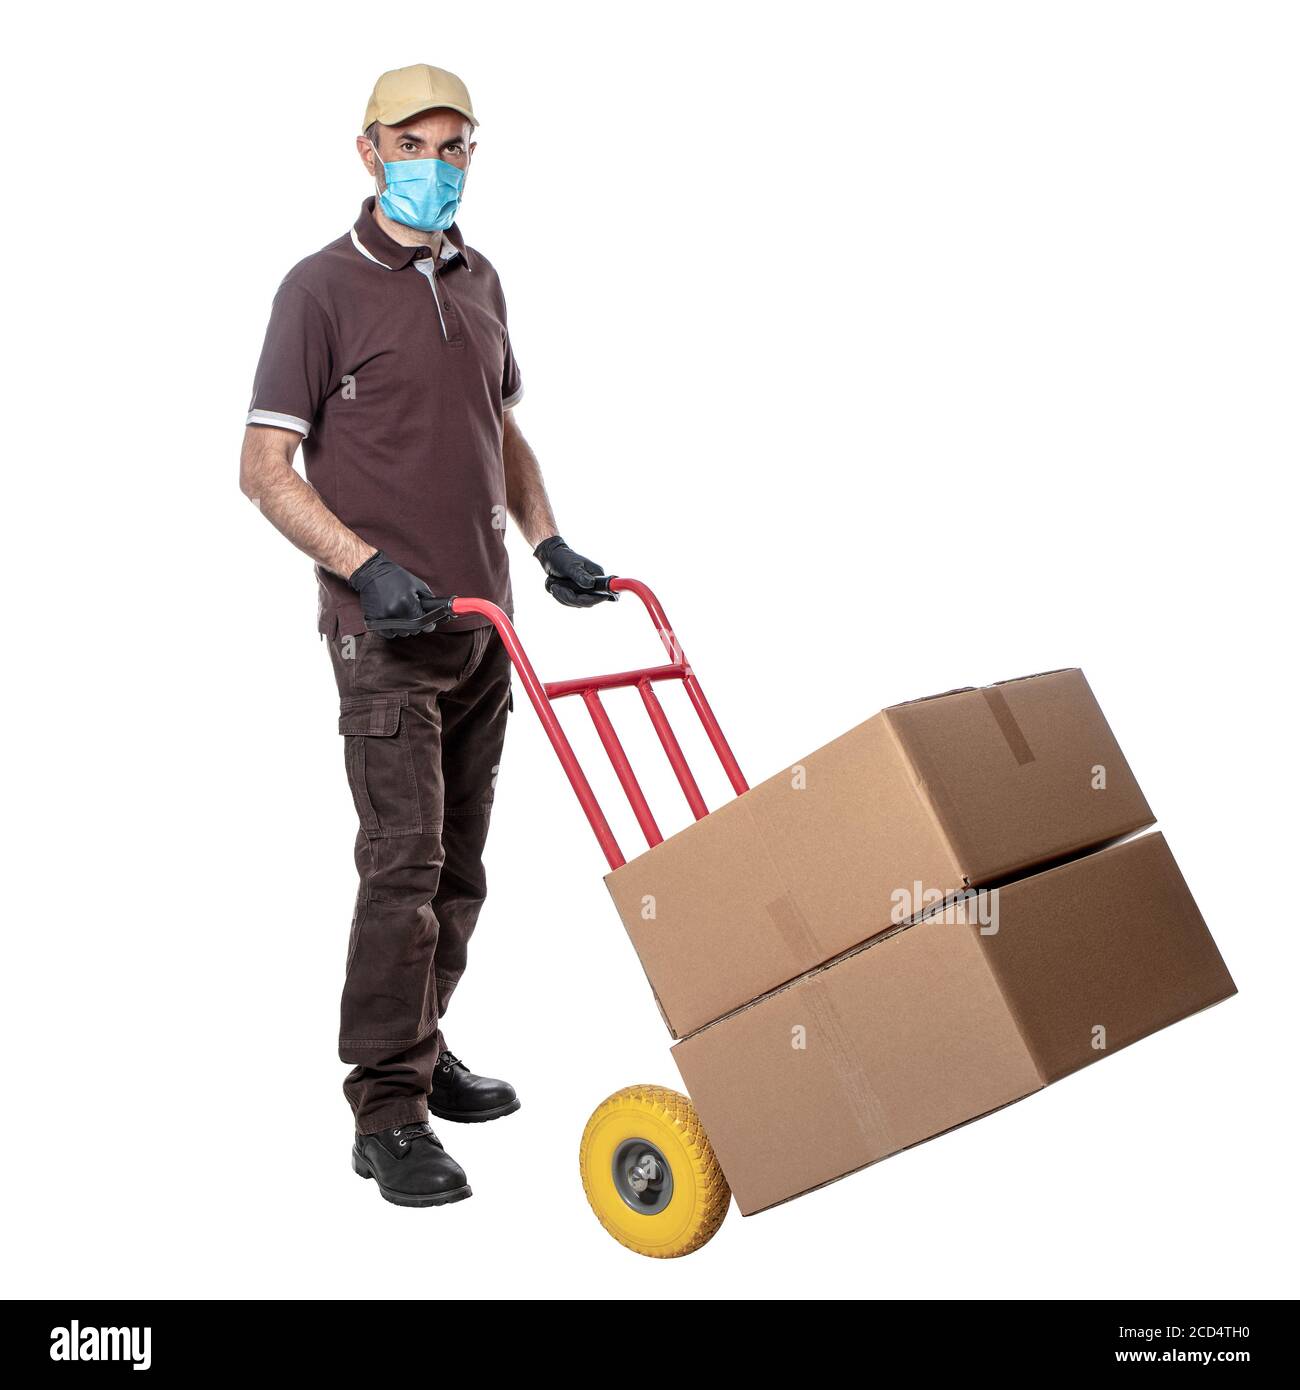 delivery man with mask for covid-19. handtruck with packages. isolated on white. work safely. Stock Photo